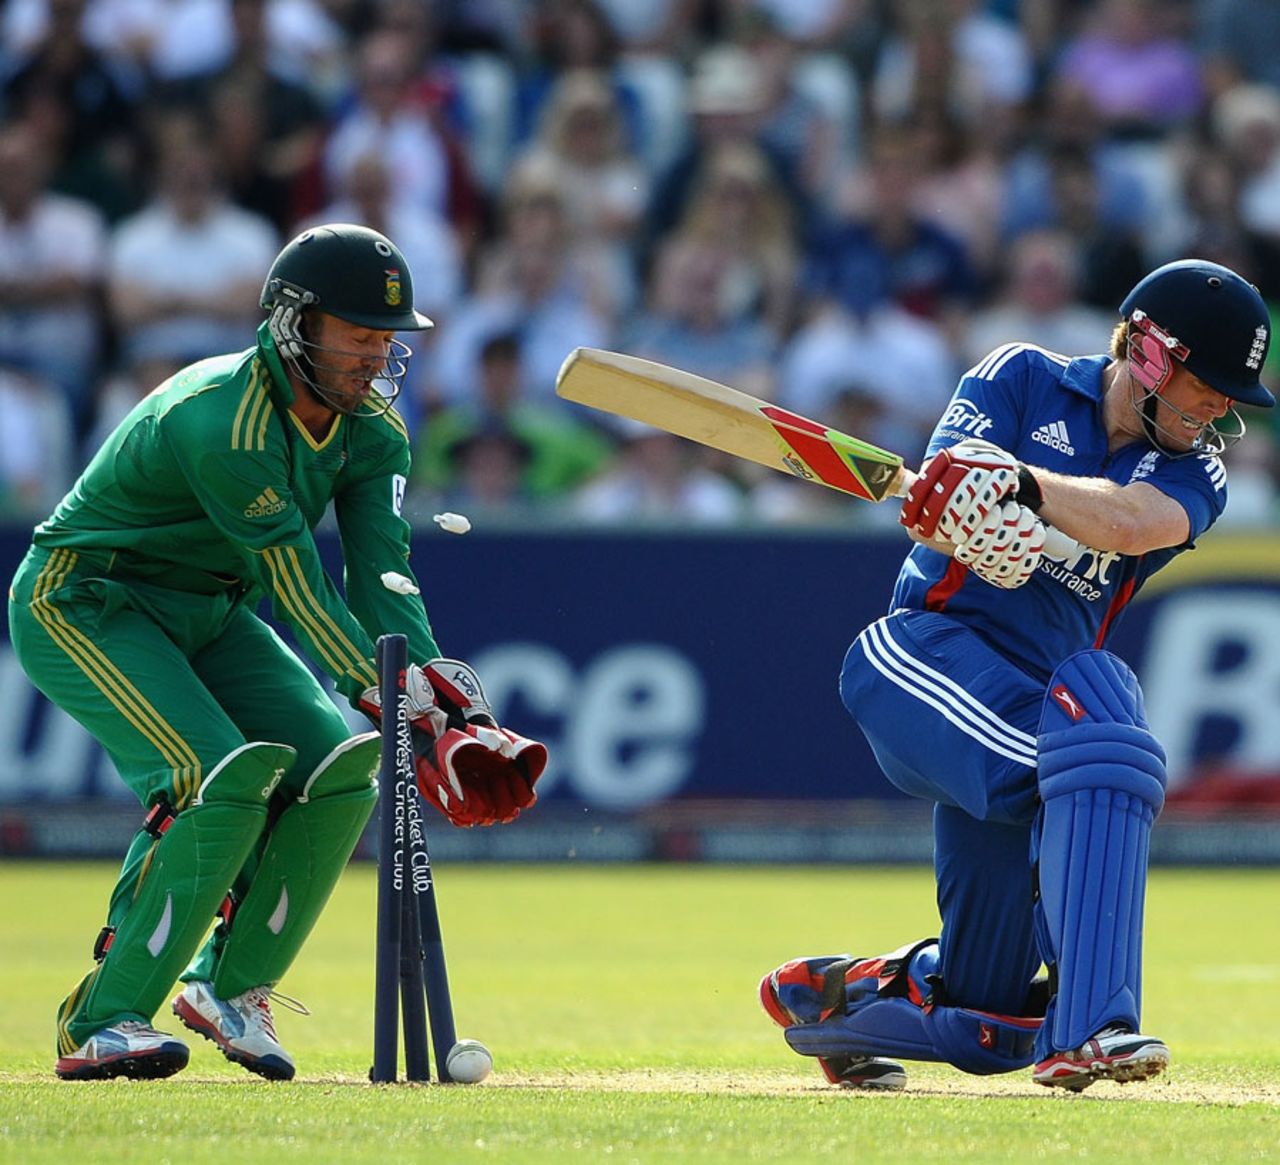 Eoin Morgan drags onto his own stumps, England v South Africa, 1st NatWest T20I, Chester-le-Street, September 8, 2012